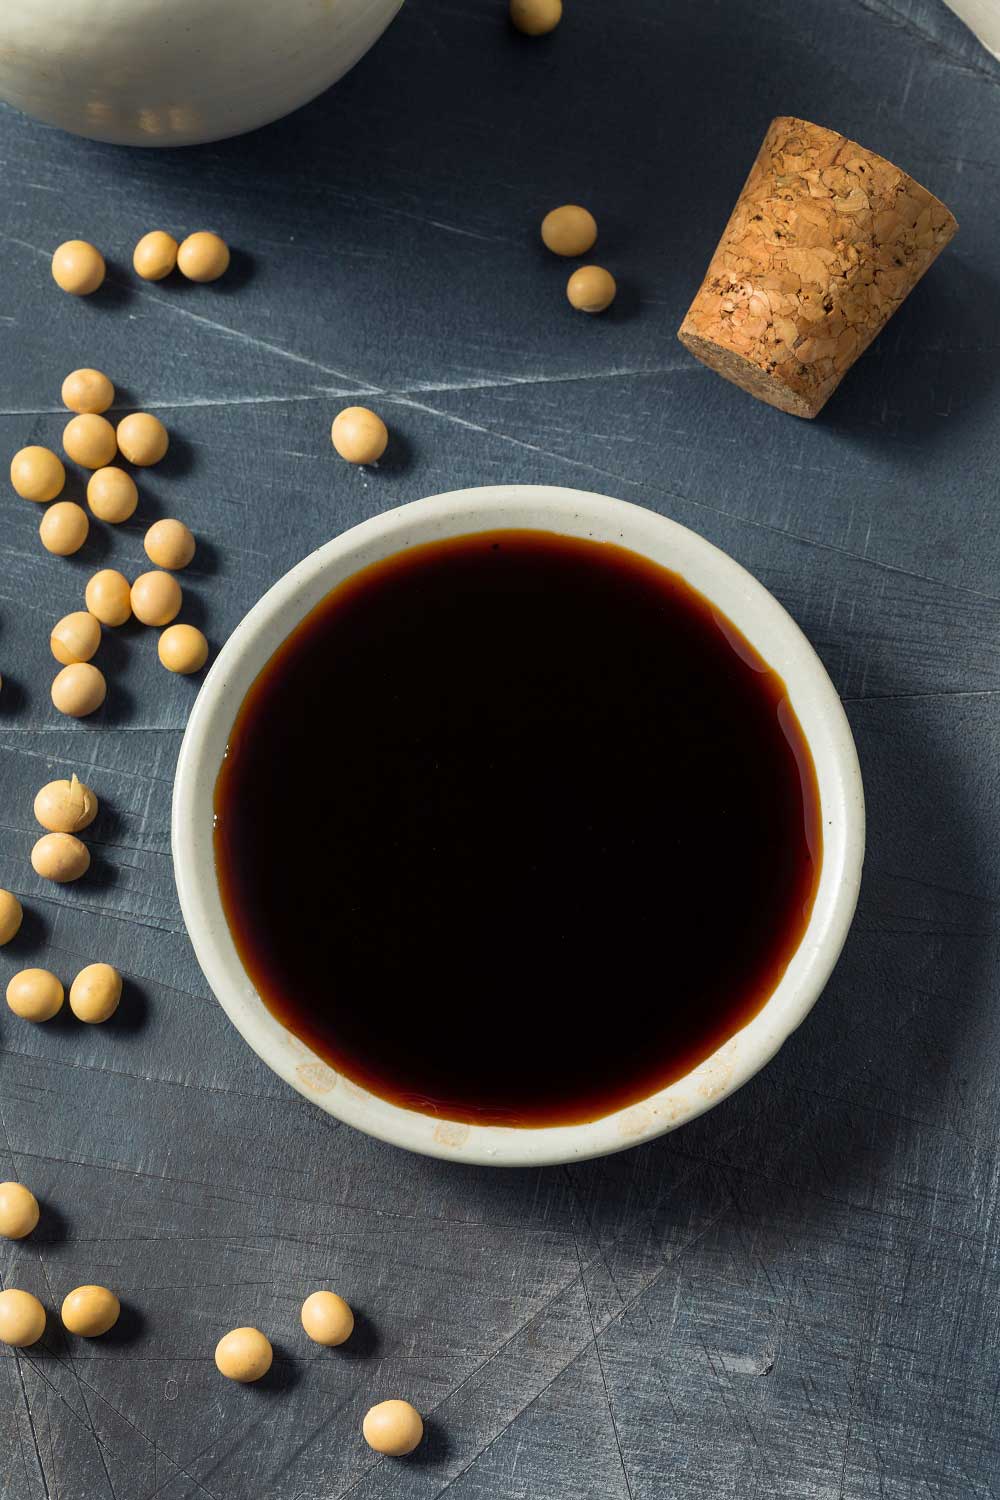 Fish Sauce Vs. Soy Sauce Vs. Oyster Sauce - What Are The Differences